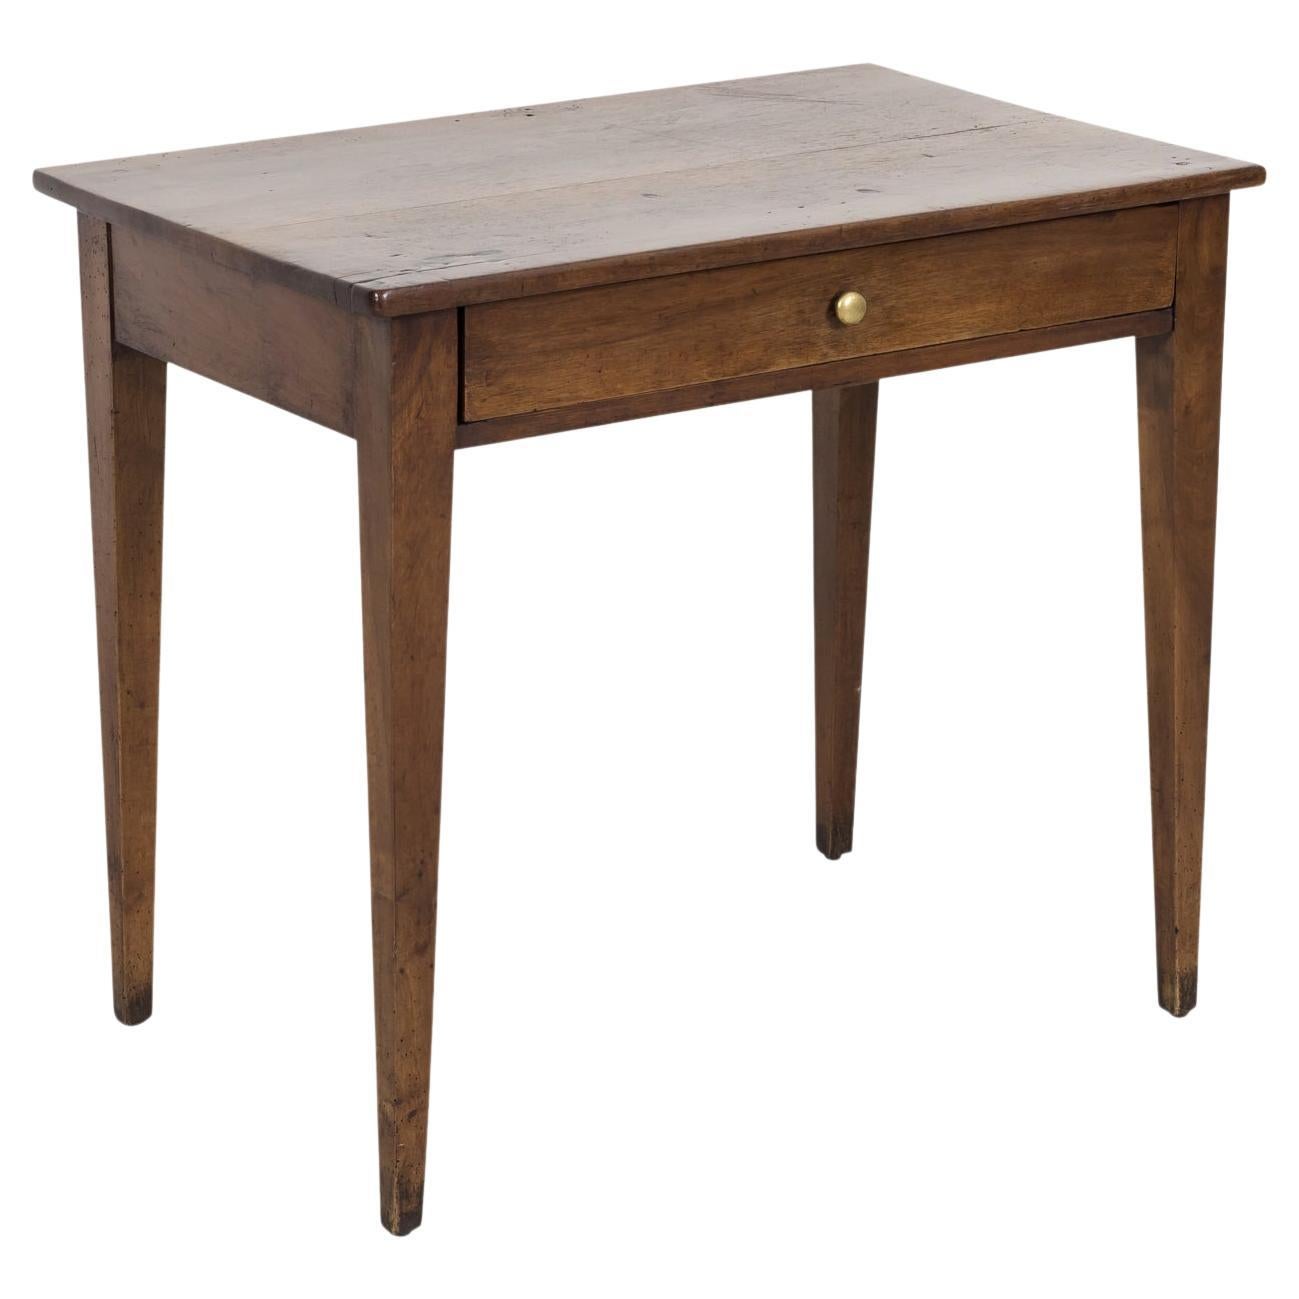 19th Century French Country Walnut Side Table or Work Table